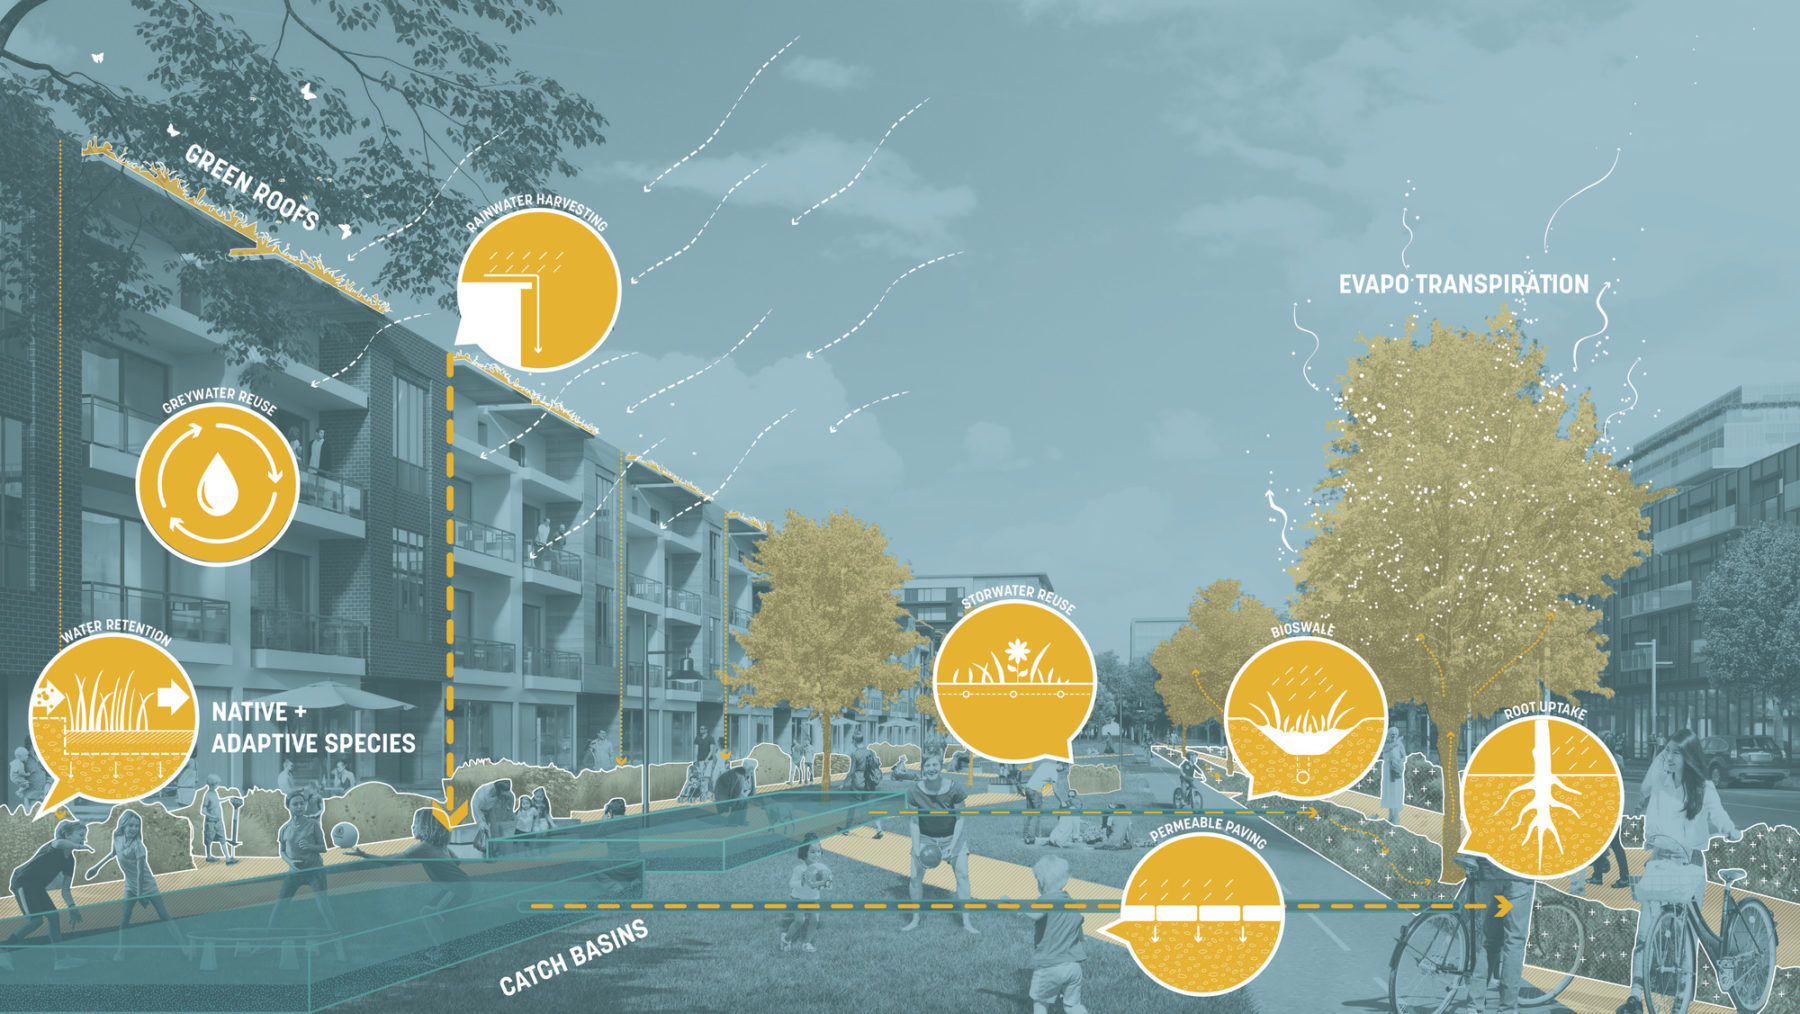 rendering of site overlaid with stormwater strategies in yellow callouts